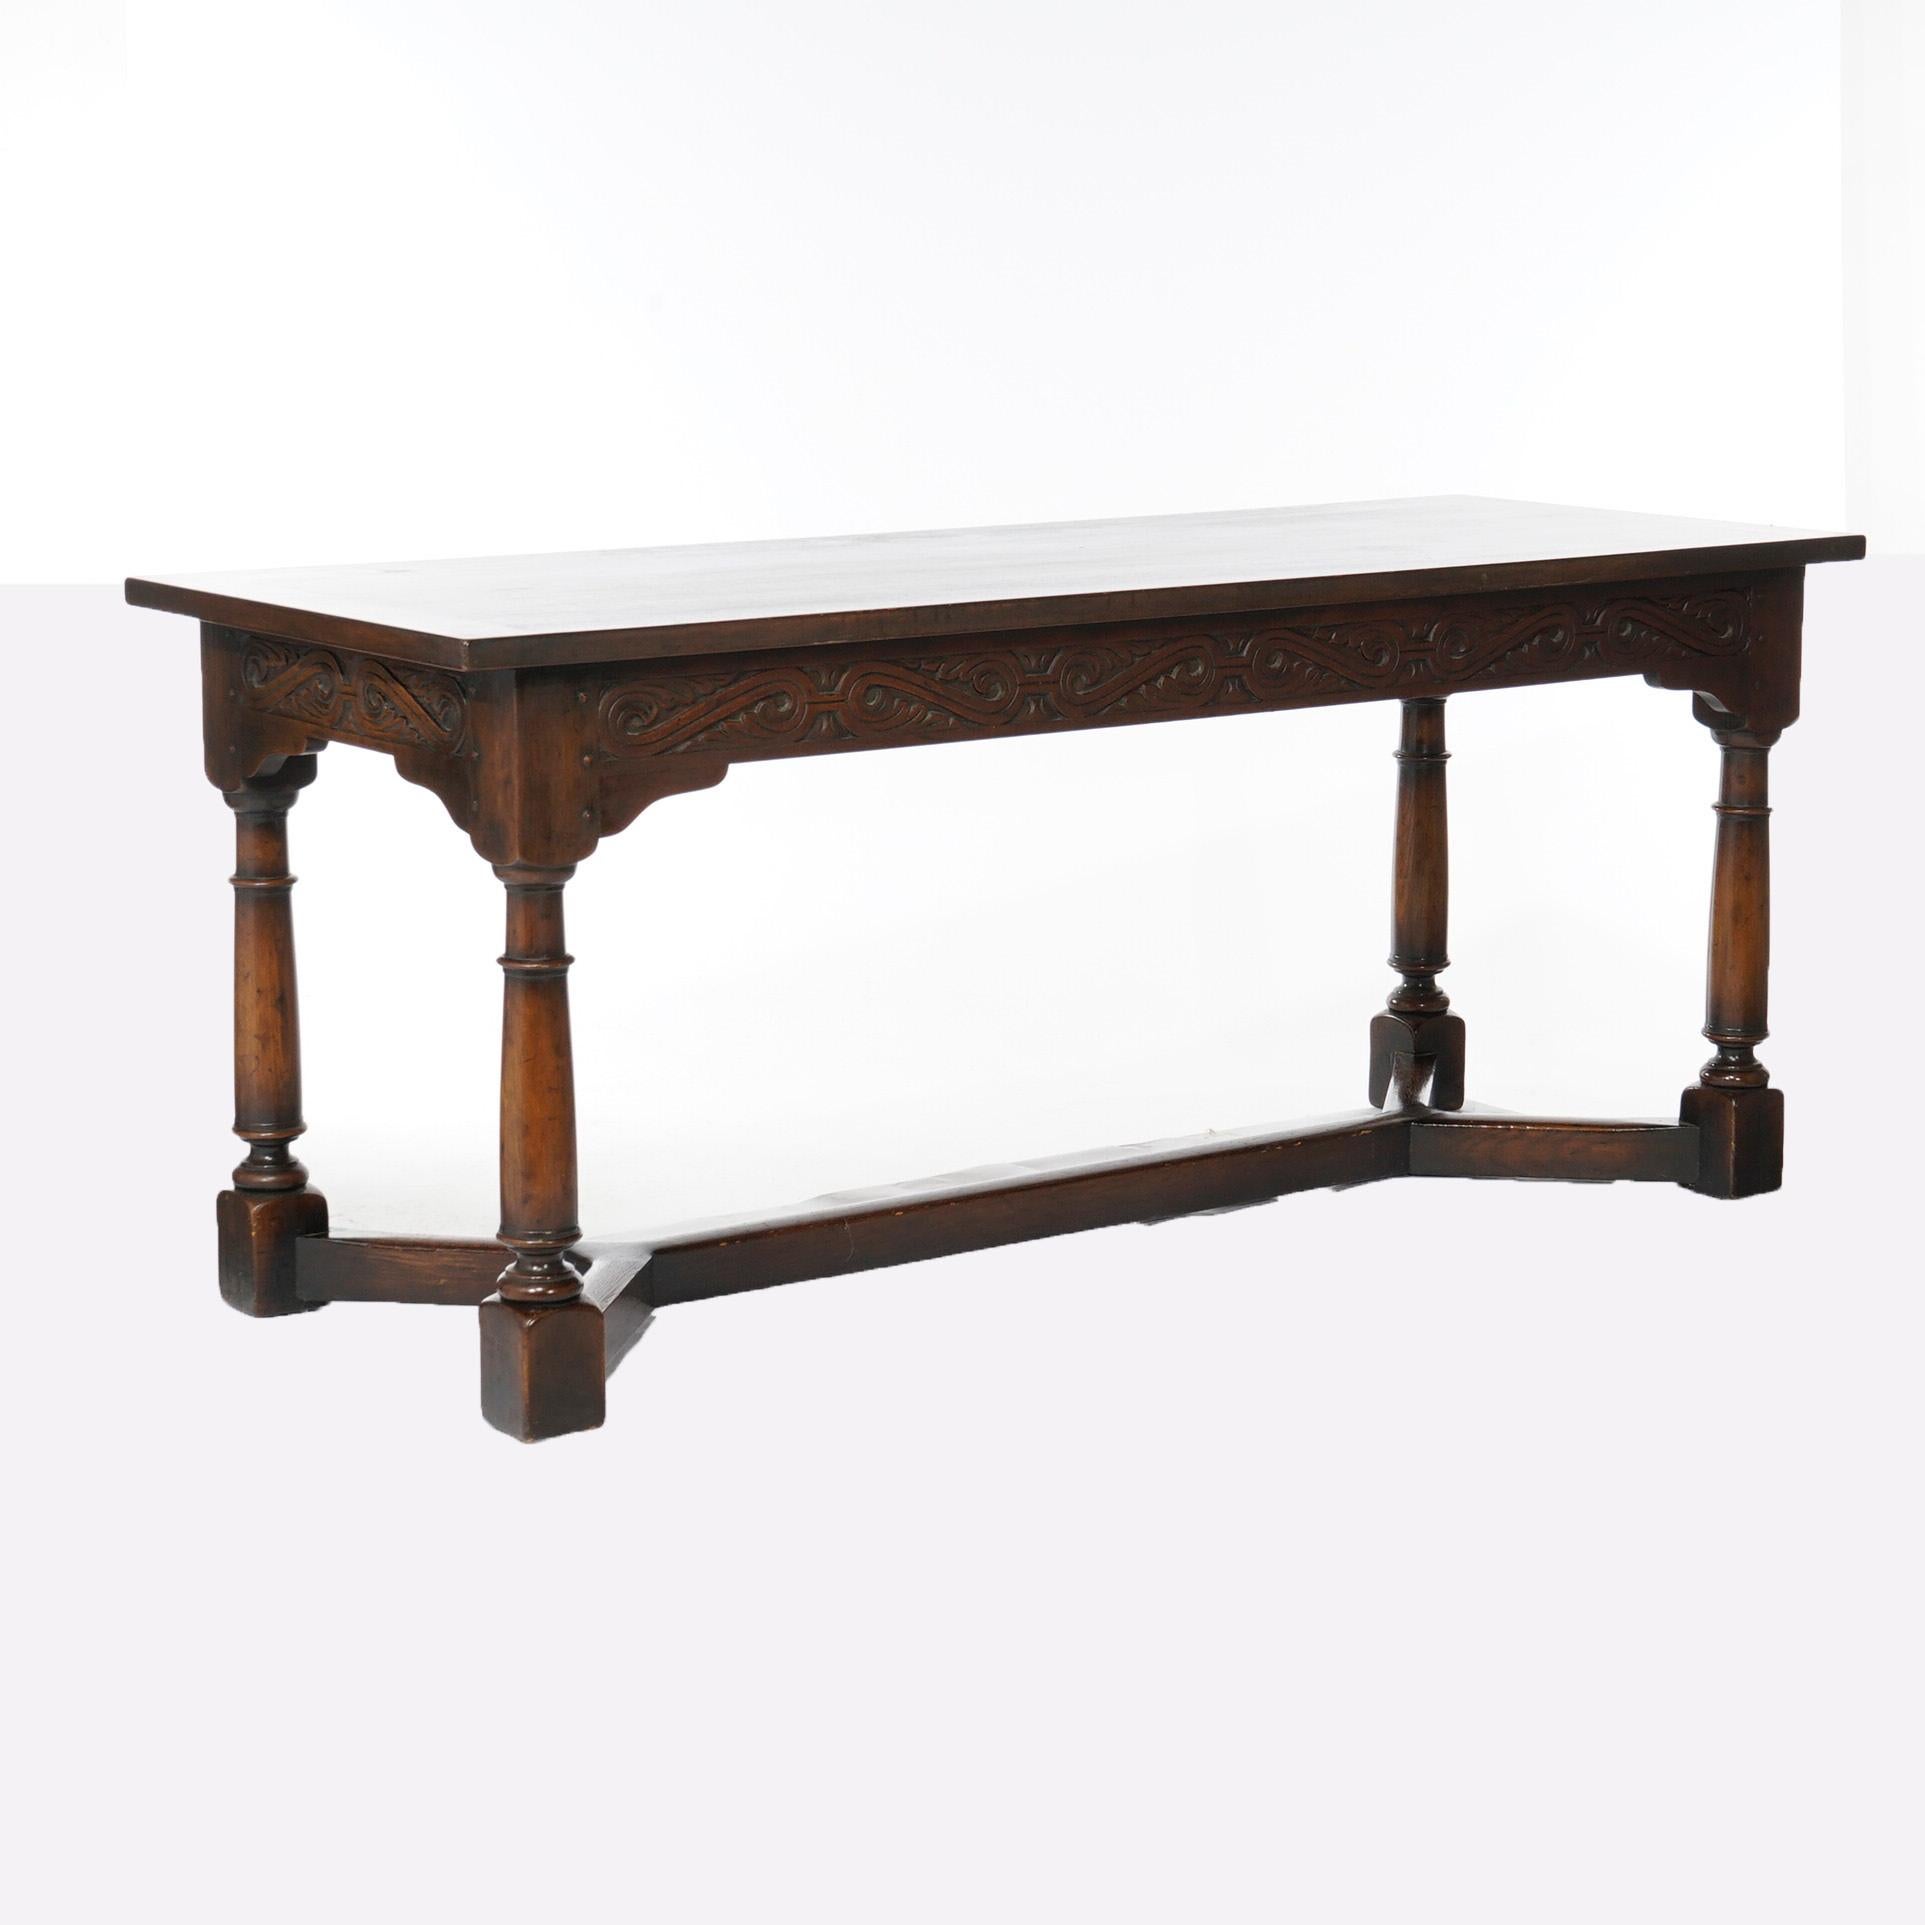 AN antique long sofa table by Kittinger offers oak construction with deeply carved skirt having scroll and foliate design, raised on balustrade legs with cross stretcher as photographed, c1910

Measures- 30.25''H x 72''W x 27''D.